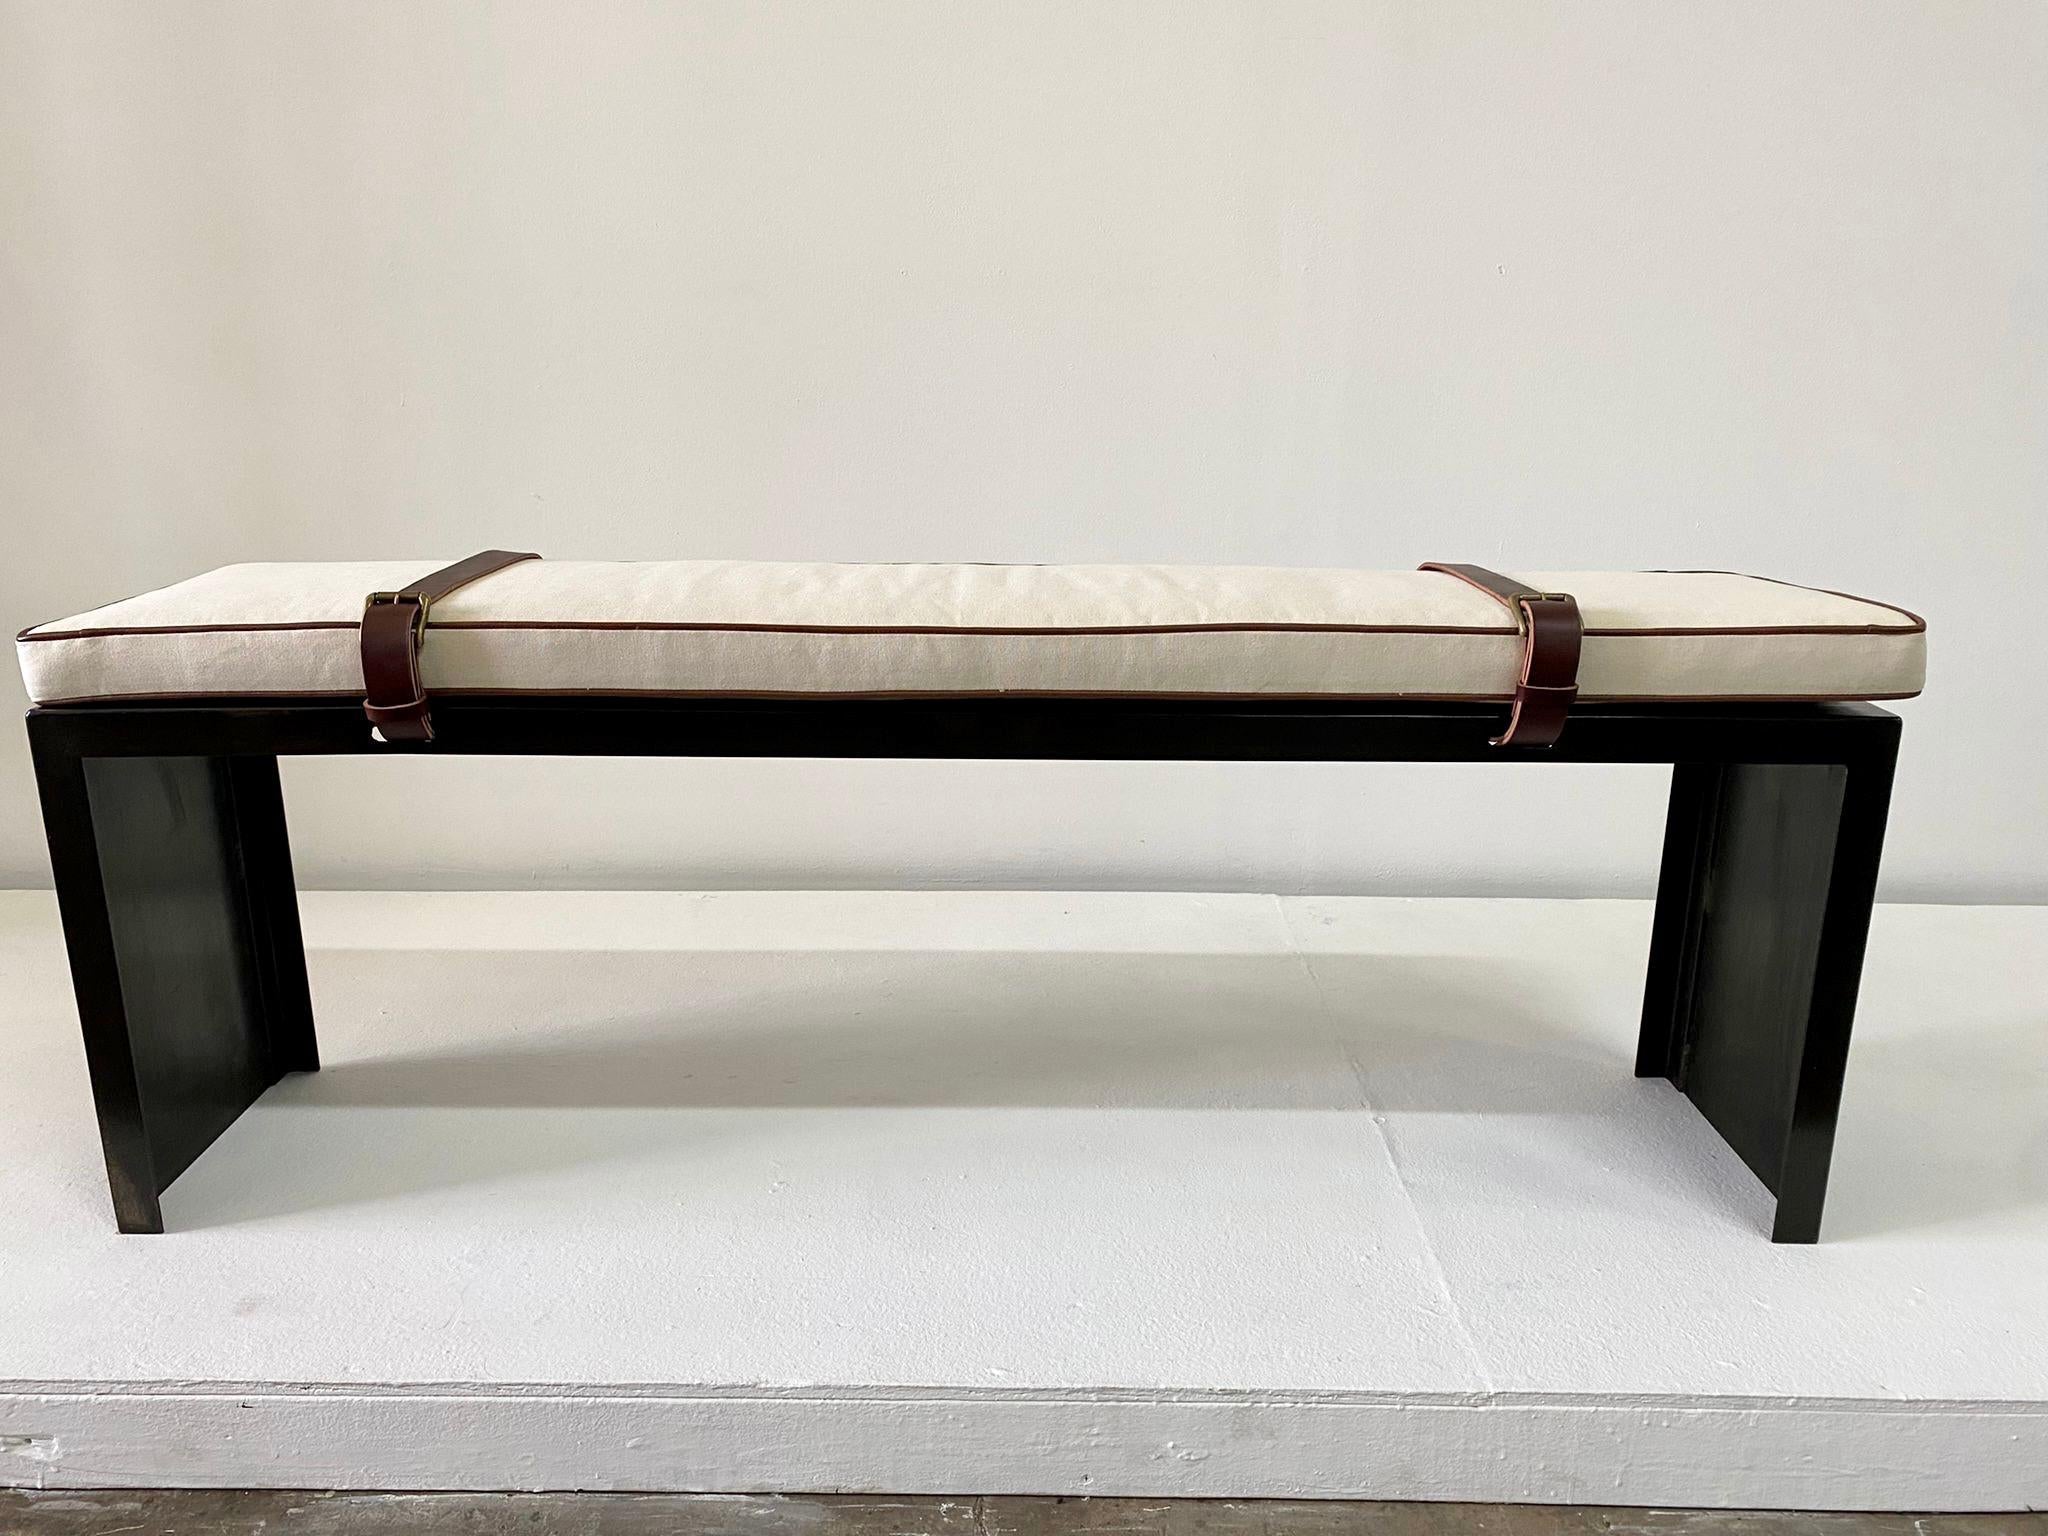 This industrial style bench with clean lines is topped by a cognac leather piping seat cushion and two cognac leather belt straps to keep it in place. This is heavy and solid, comfortable with the newly upholstered bench cushion. NOTE that height of